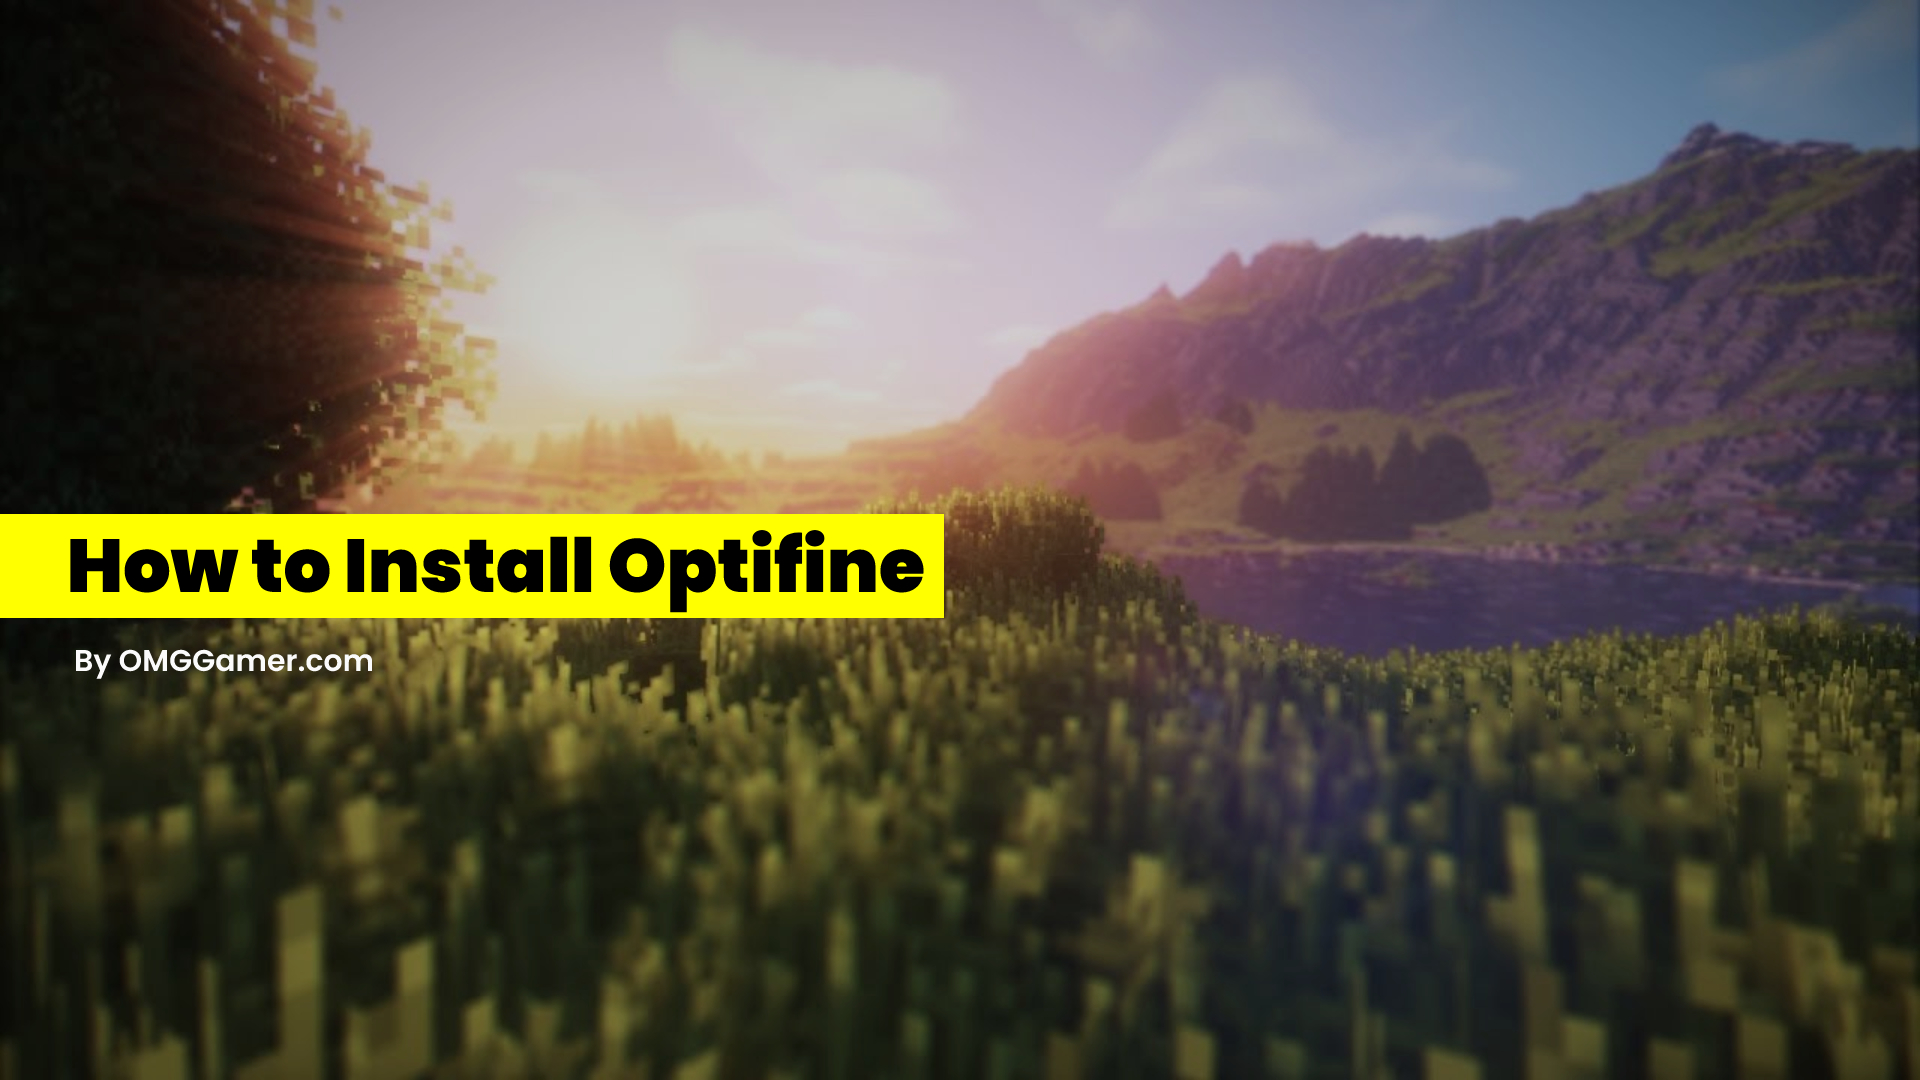 How to Install Optifine